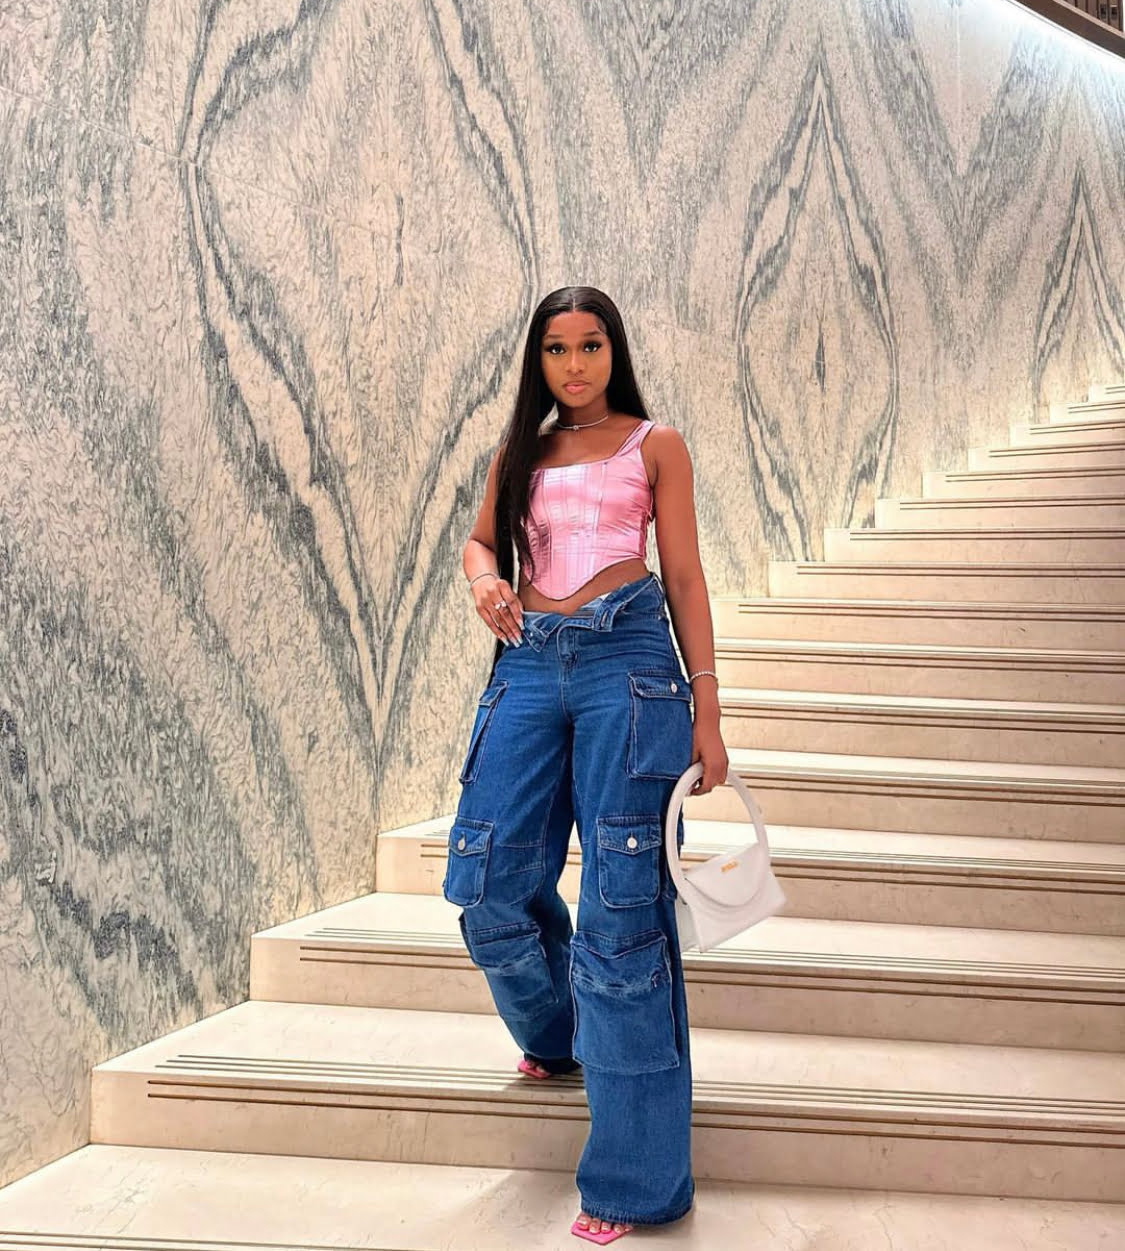 Frances Theodore in a pink corset top and denim combat trousers.